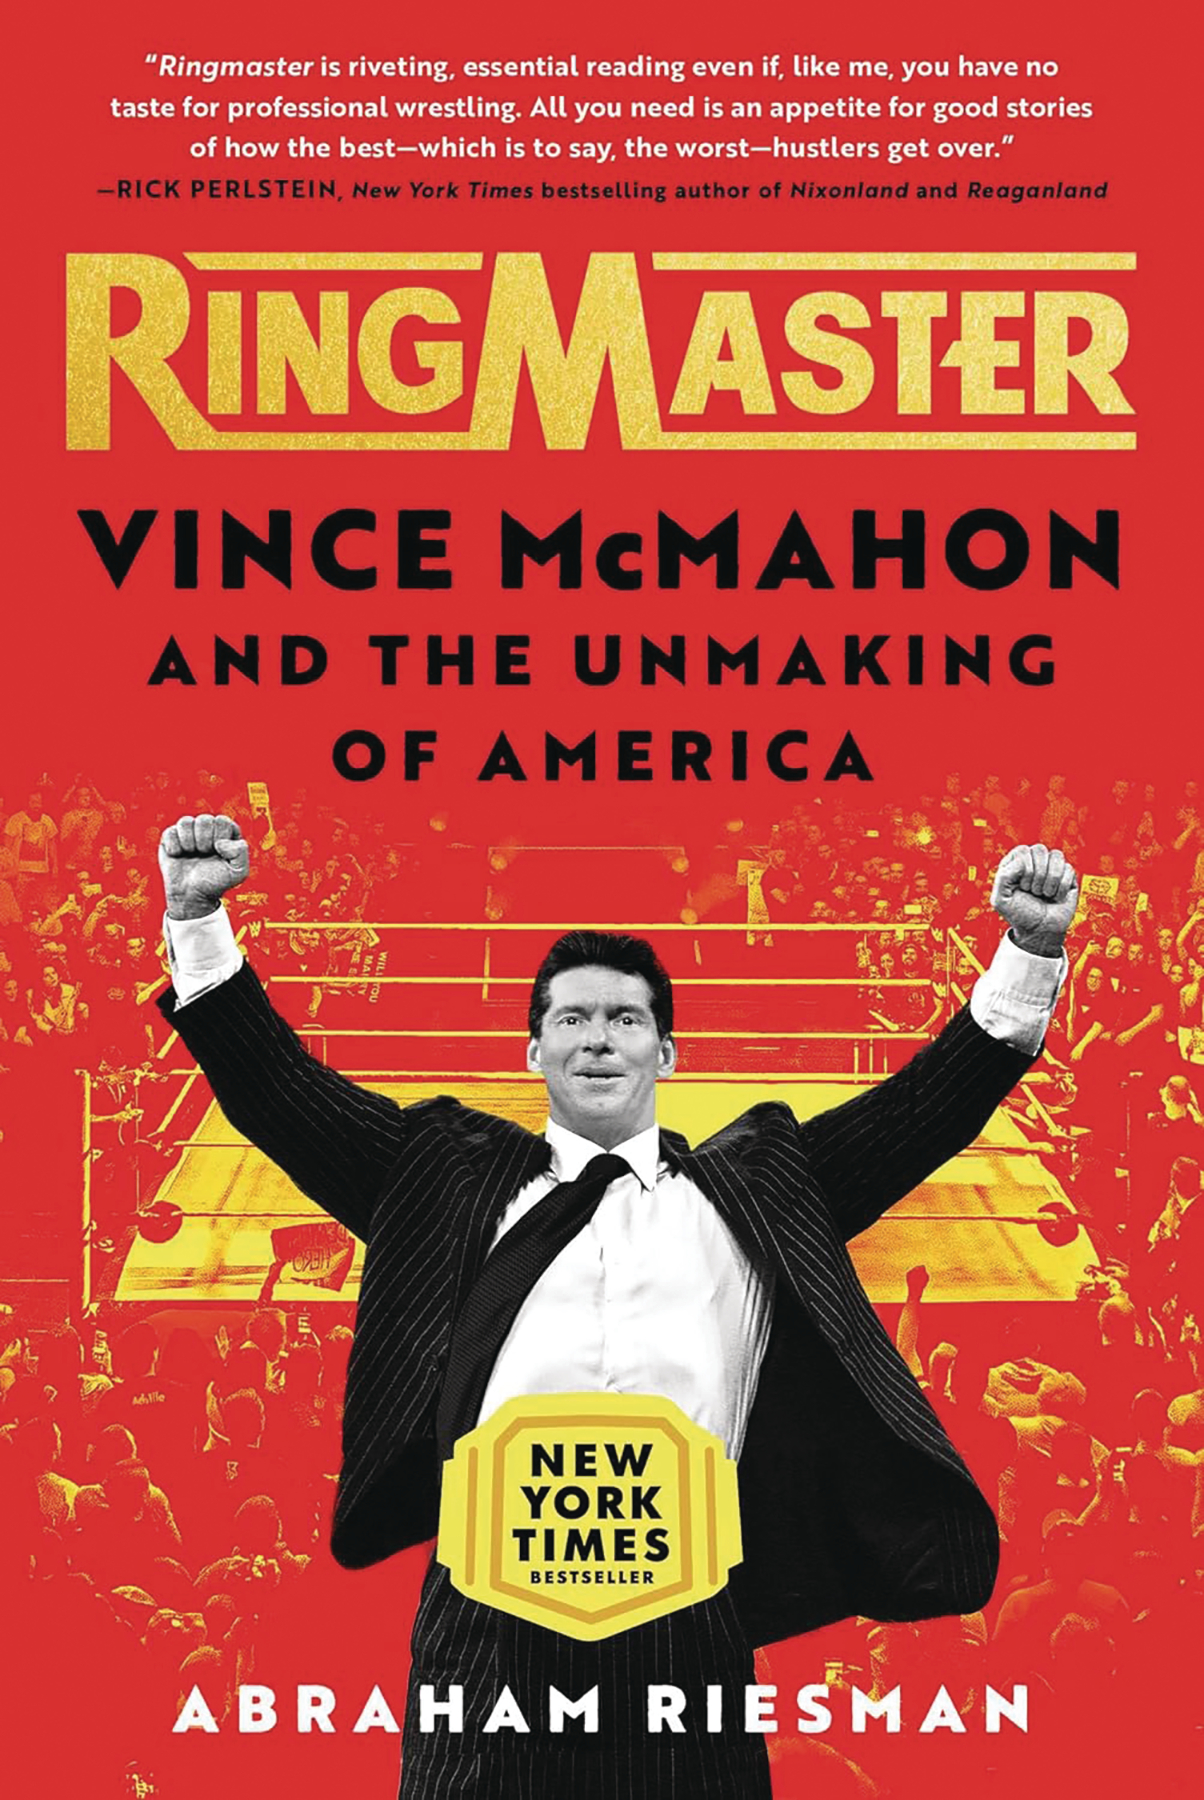 Ringmaster Vince Mcmahon & Unmaking of America Soft Cover